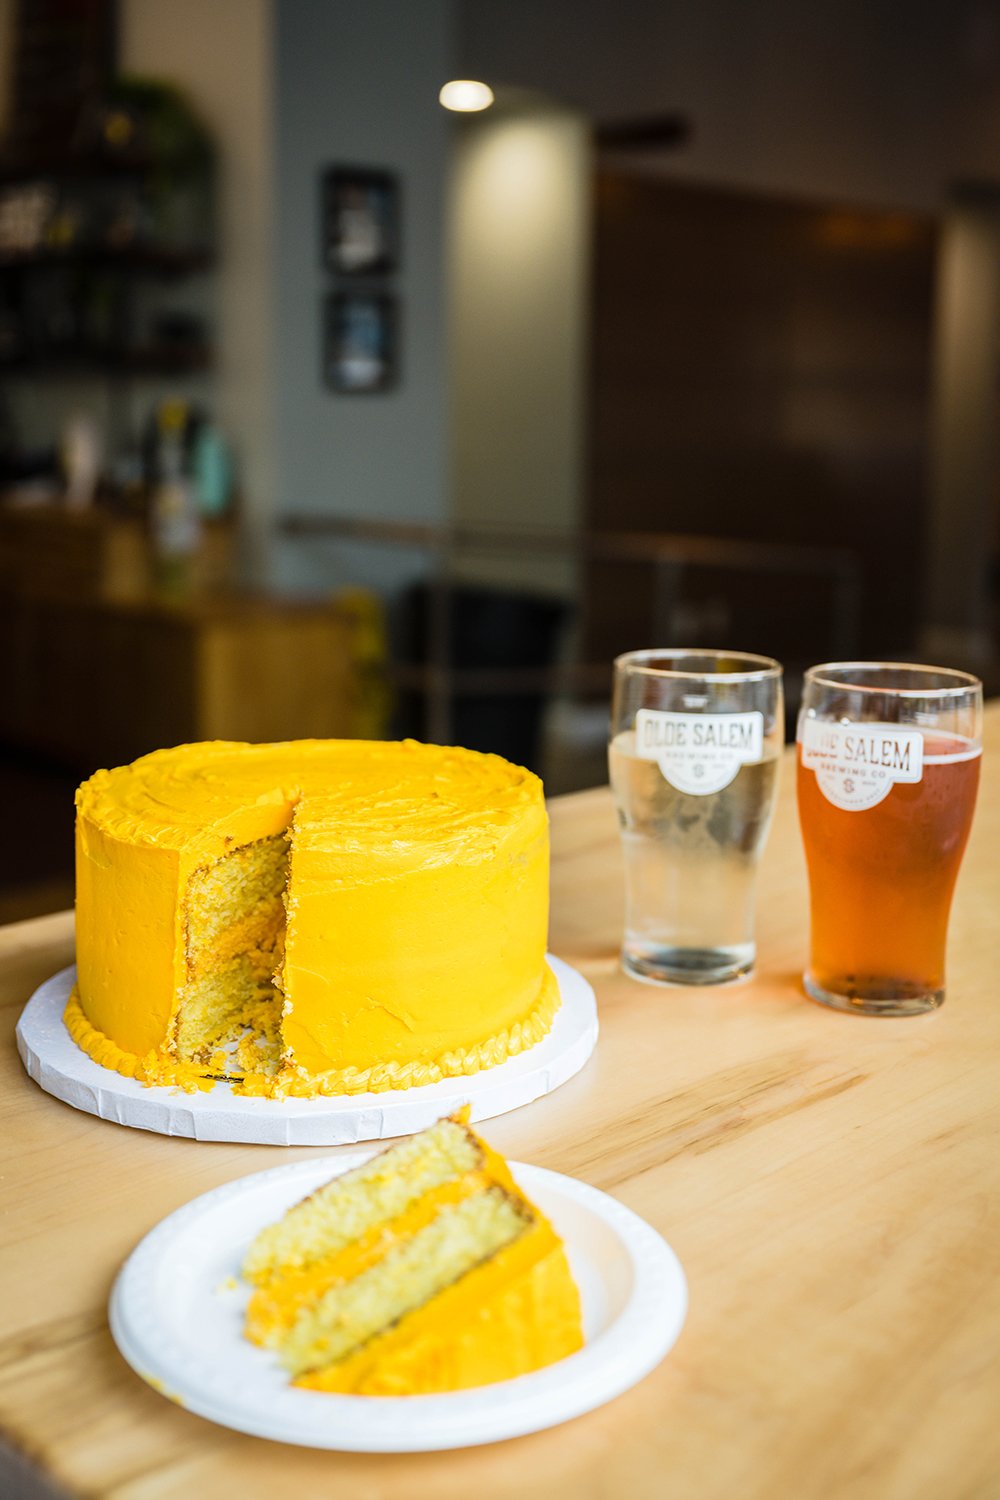 A wedding cake with a slice cut out sits beside two beers in glasses from Olde Salem Brewing Company in Downtown Roanoke.